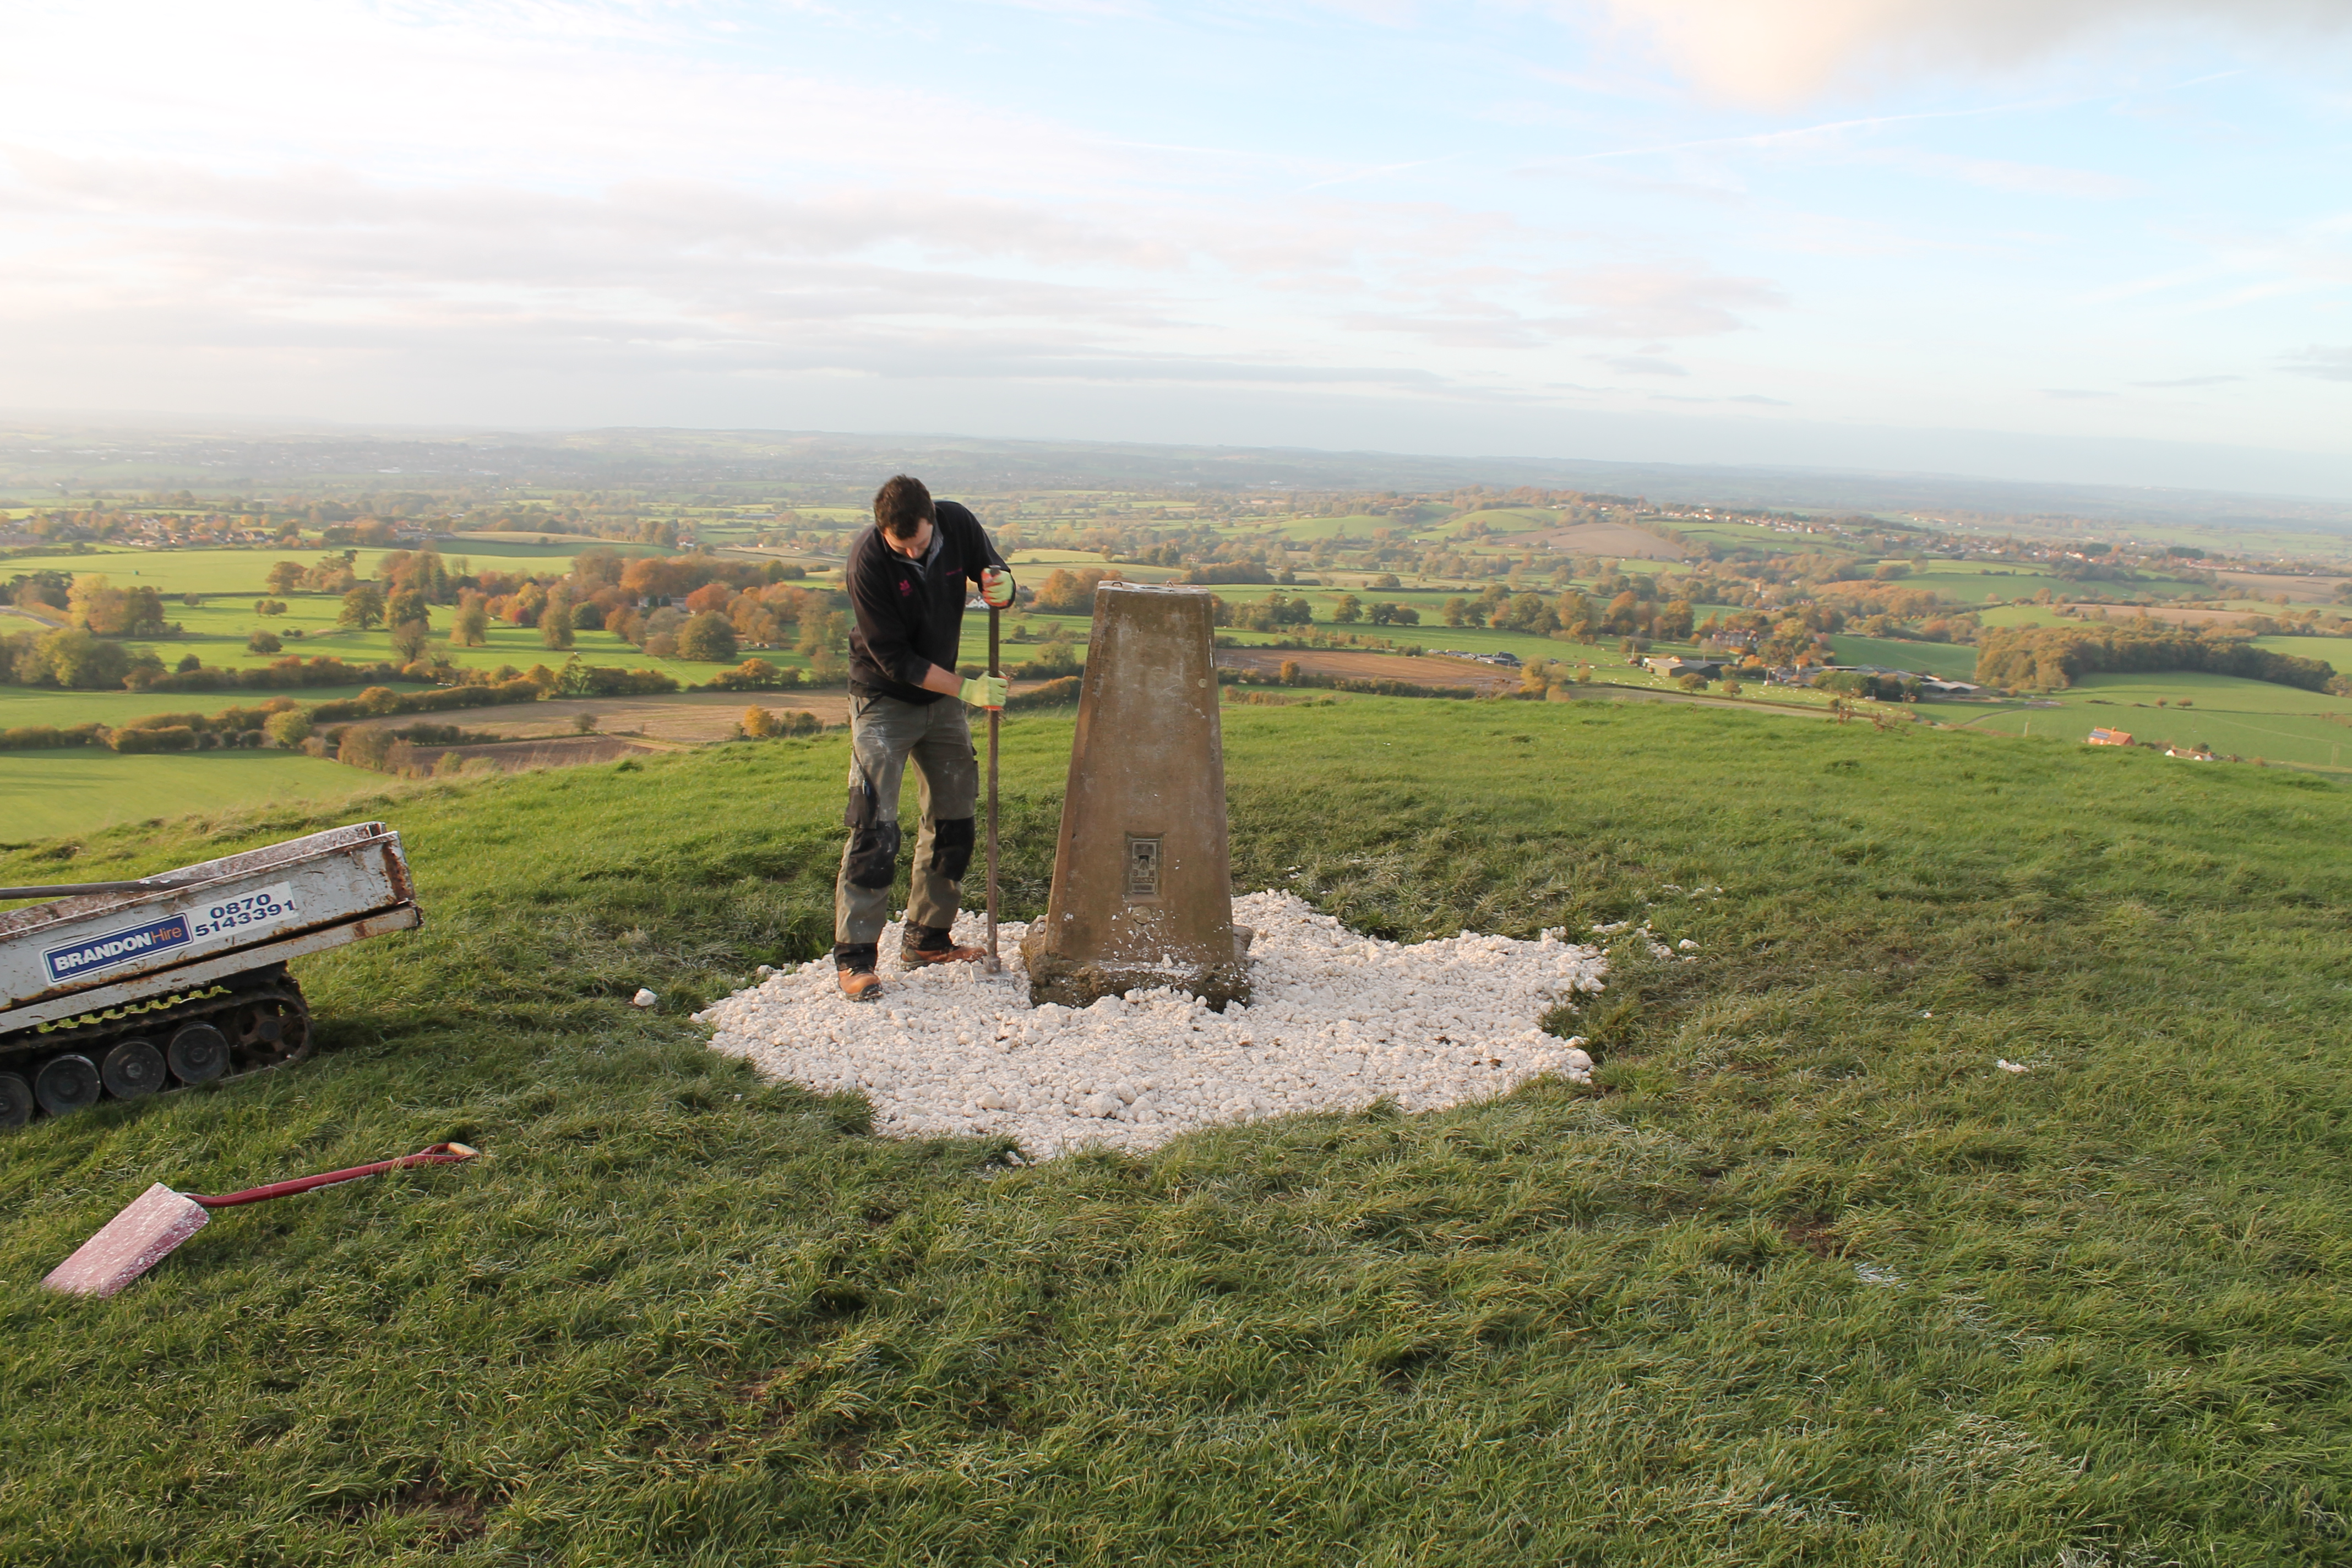 Paul tamping down the chalk around the OS Trig Station. It attracts a lot of erosion.